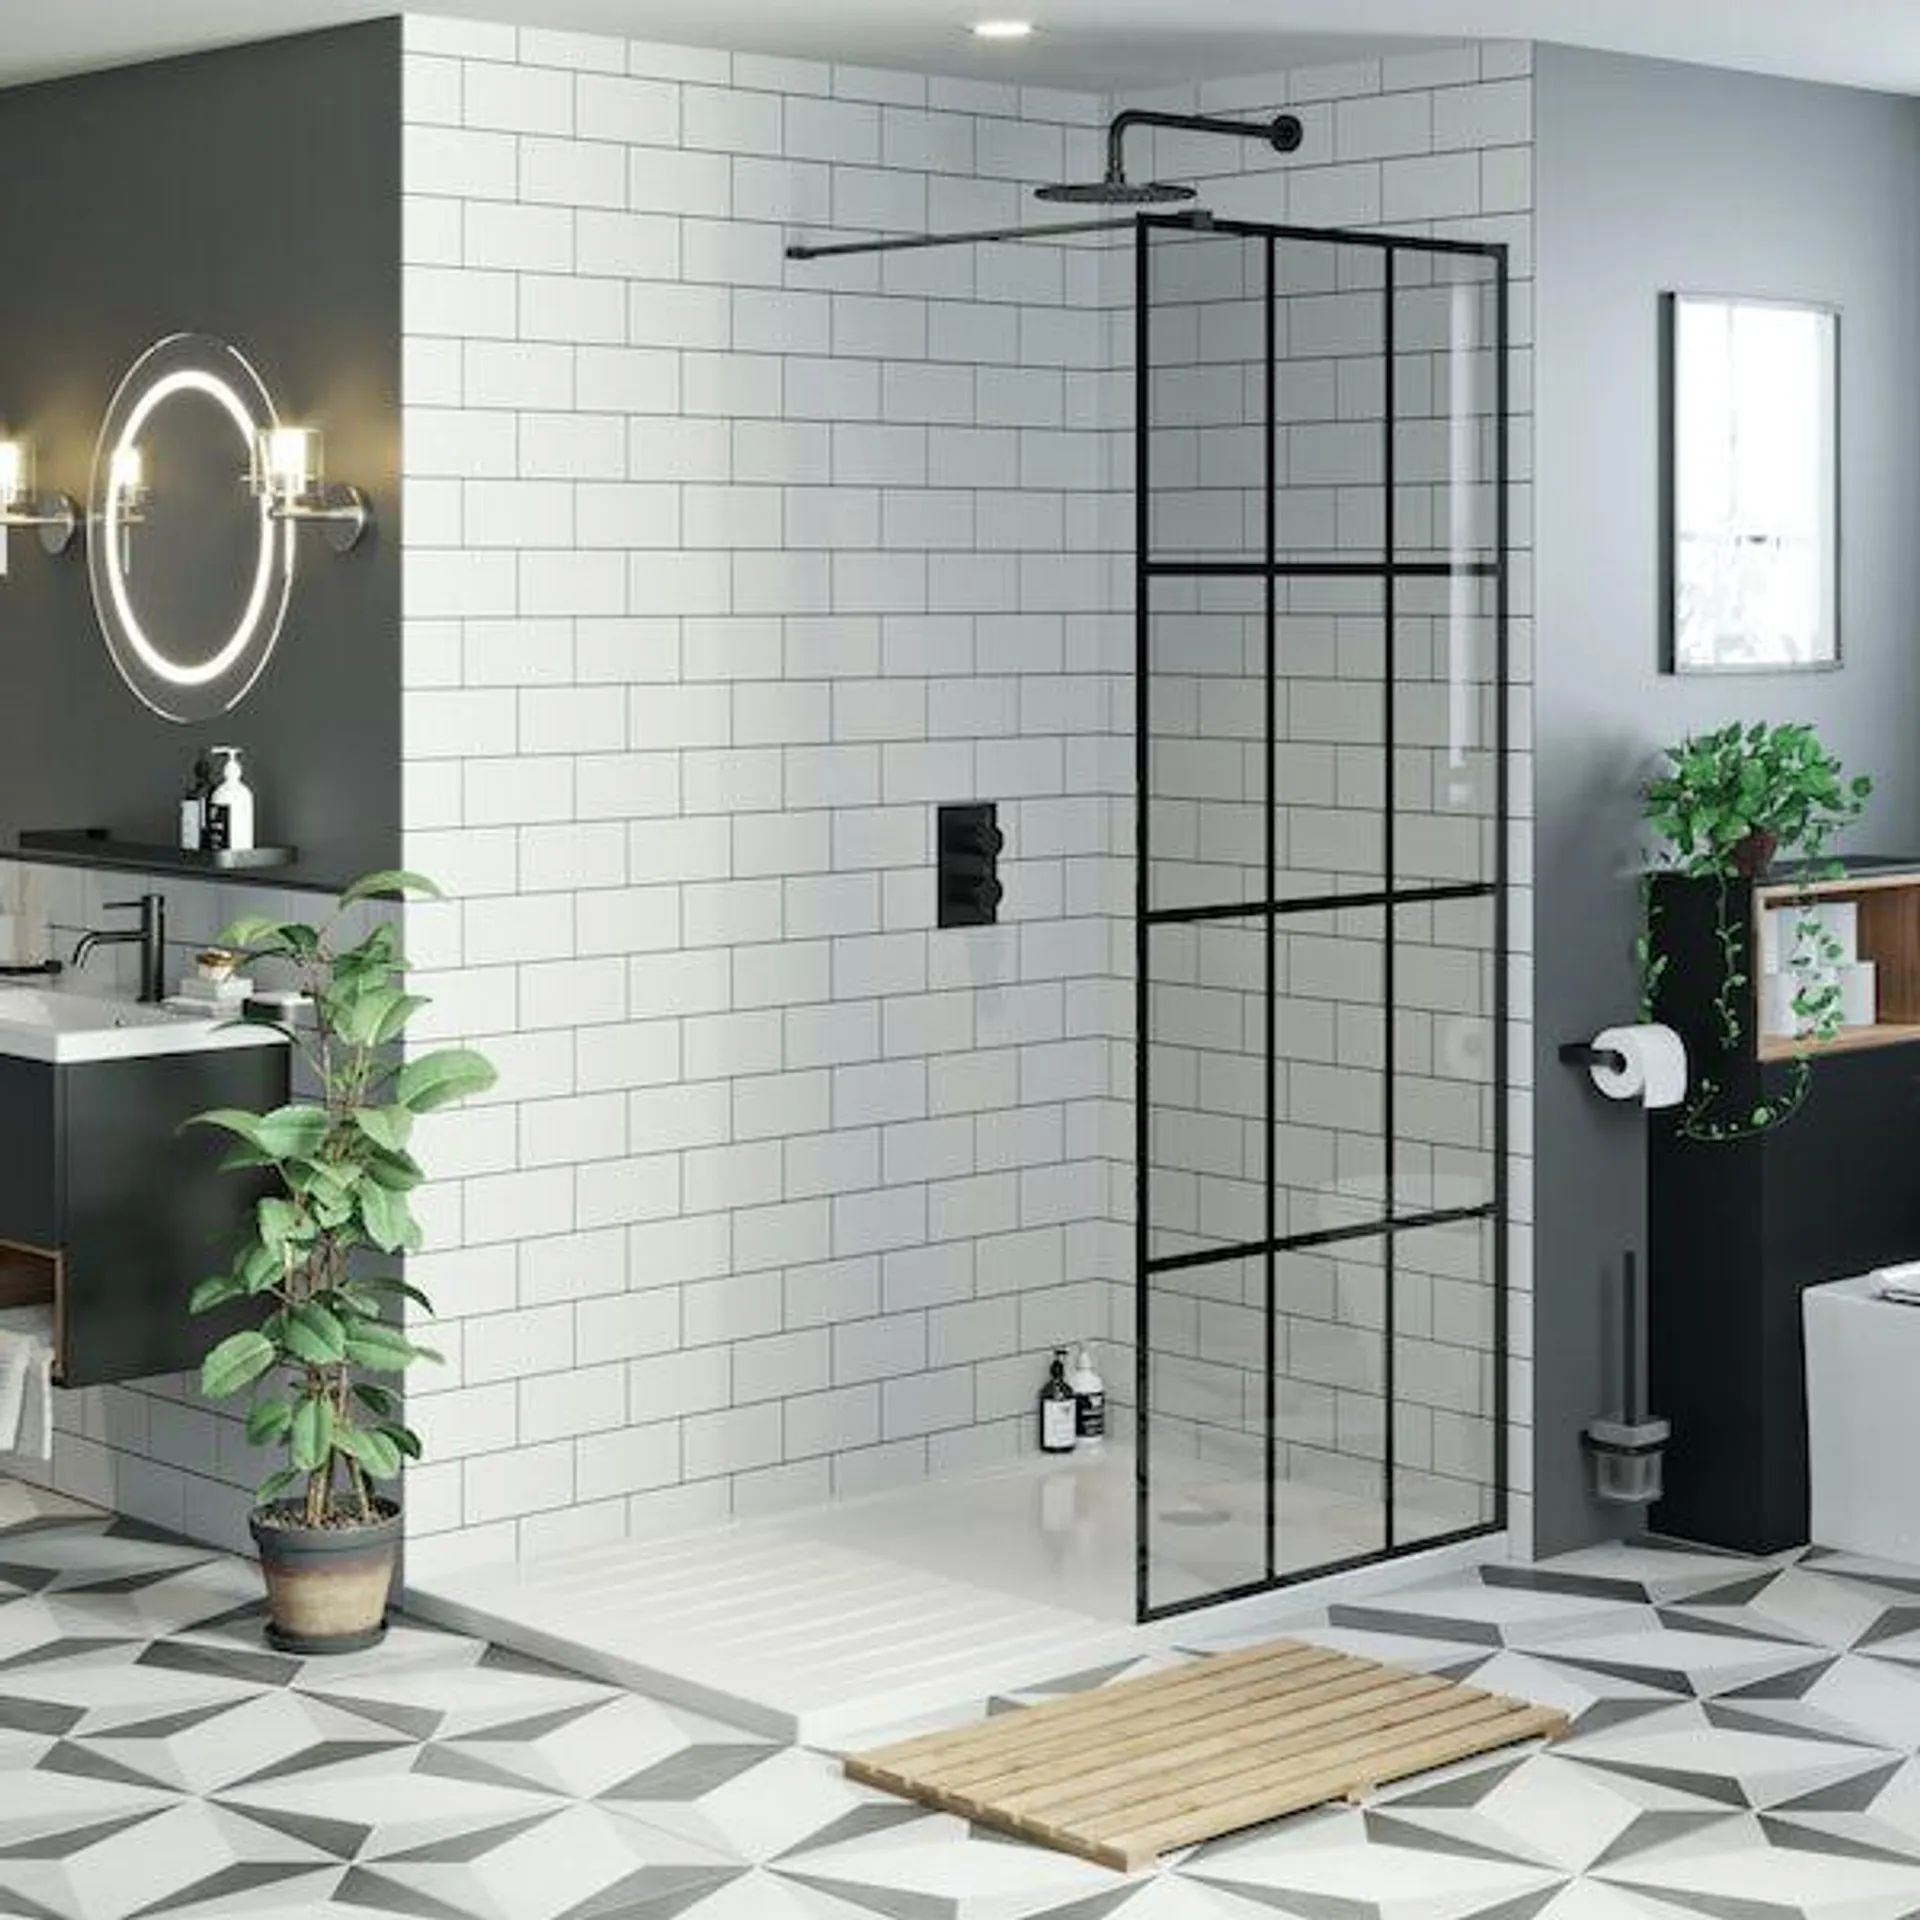 Mode 8mm black framed wet room glass panel with walk in shower tray